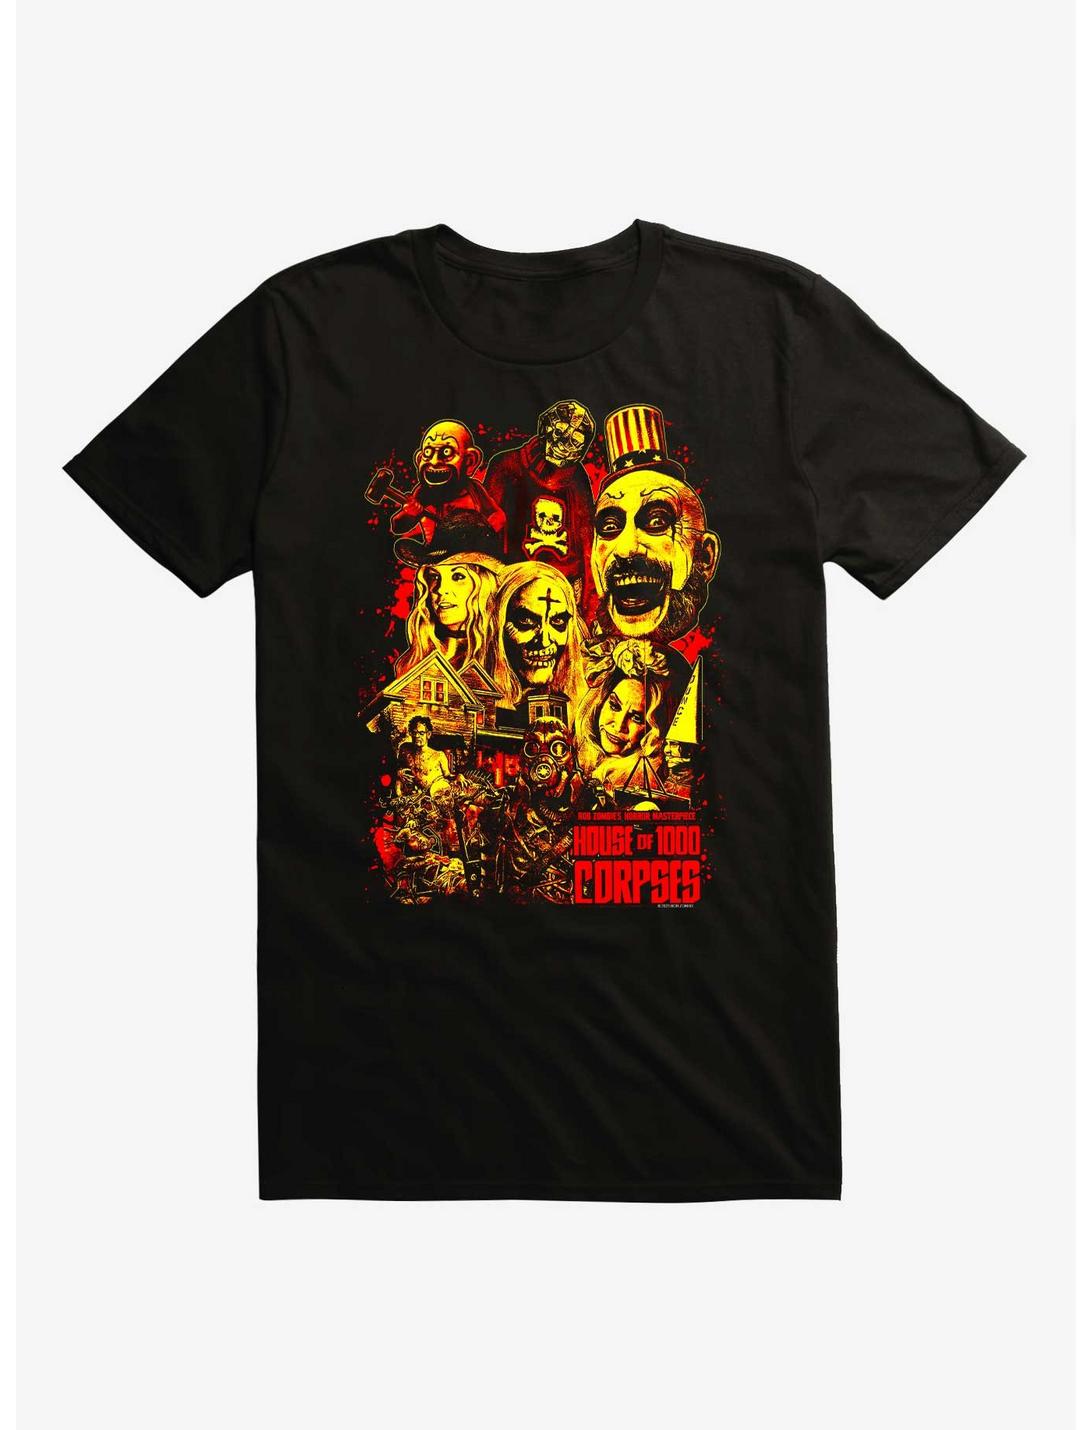 House Of 1000 Corpses Movie Poster T-Shirt, BLACK, hi-res